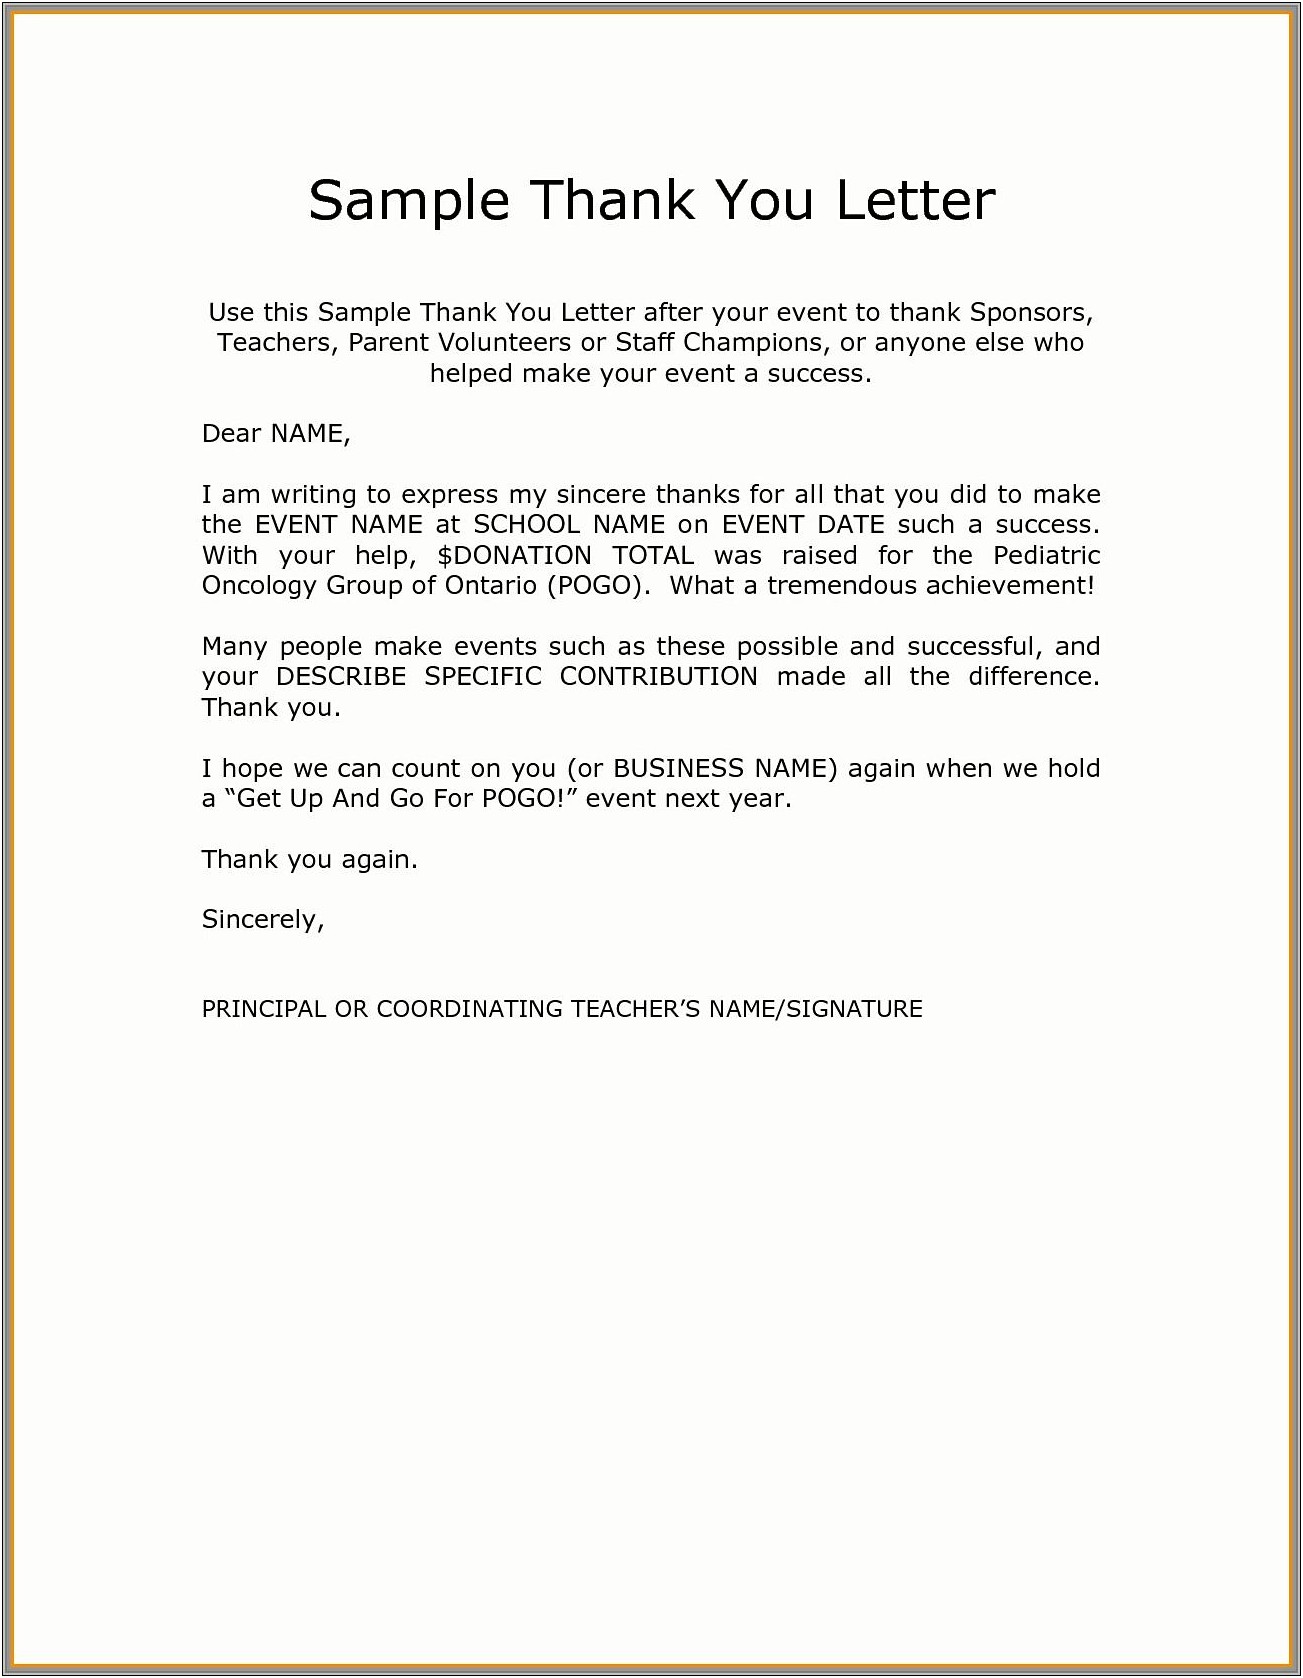 Thank You Letter After Resume Submission